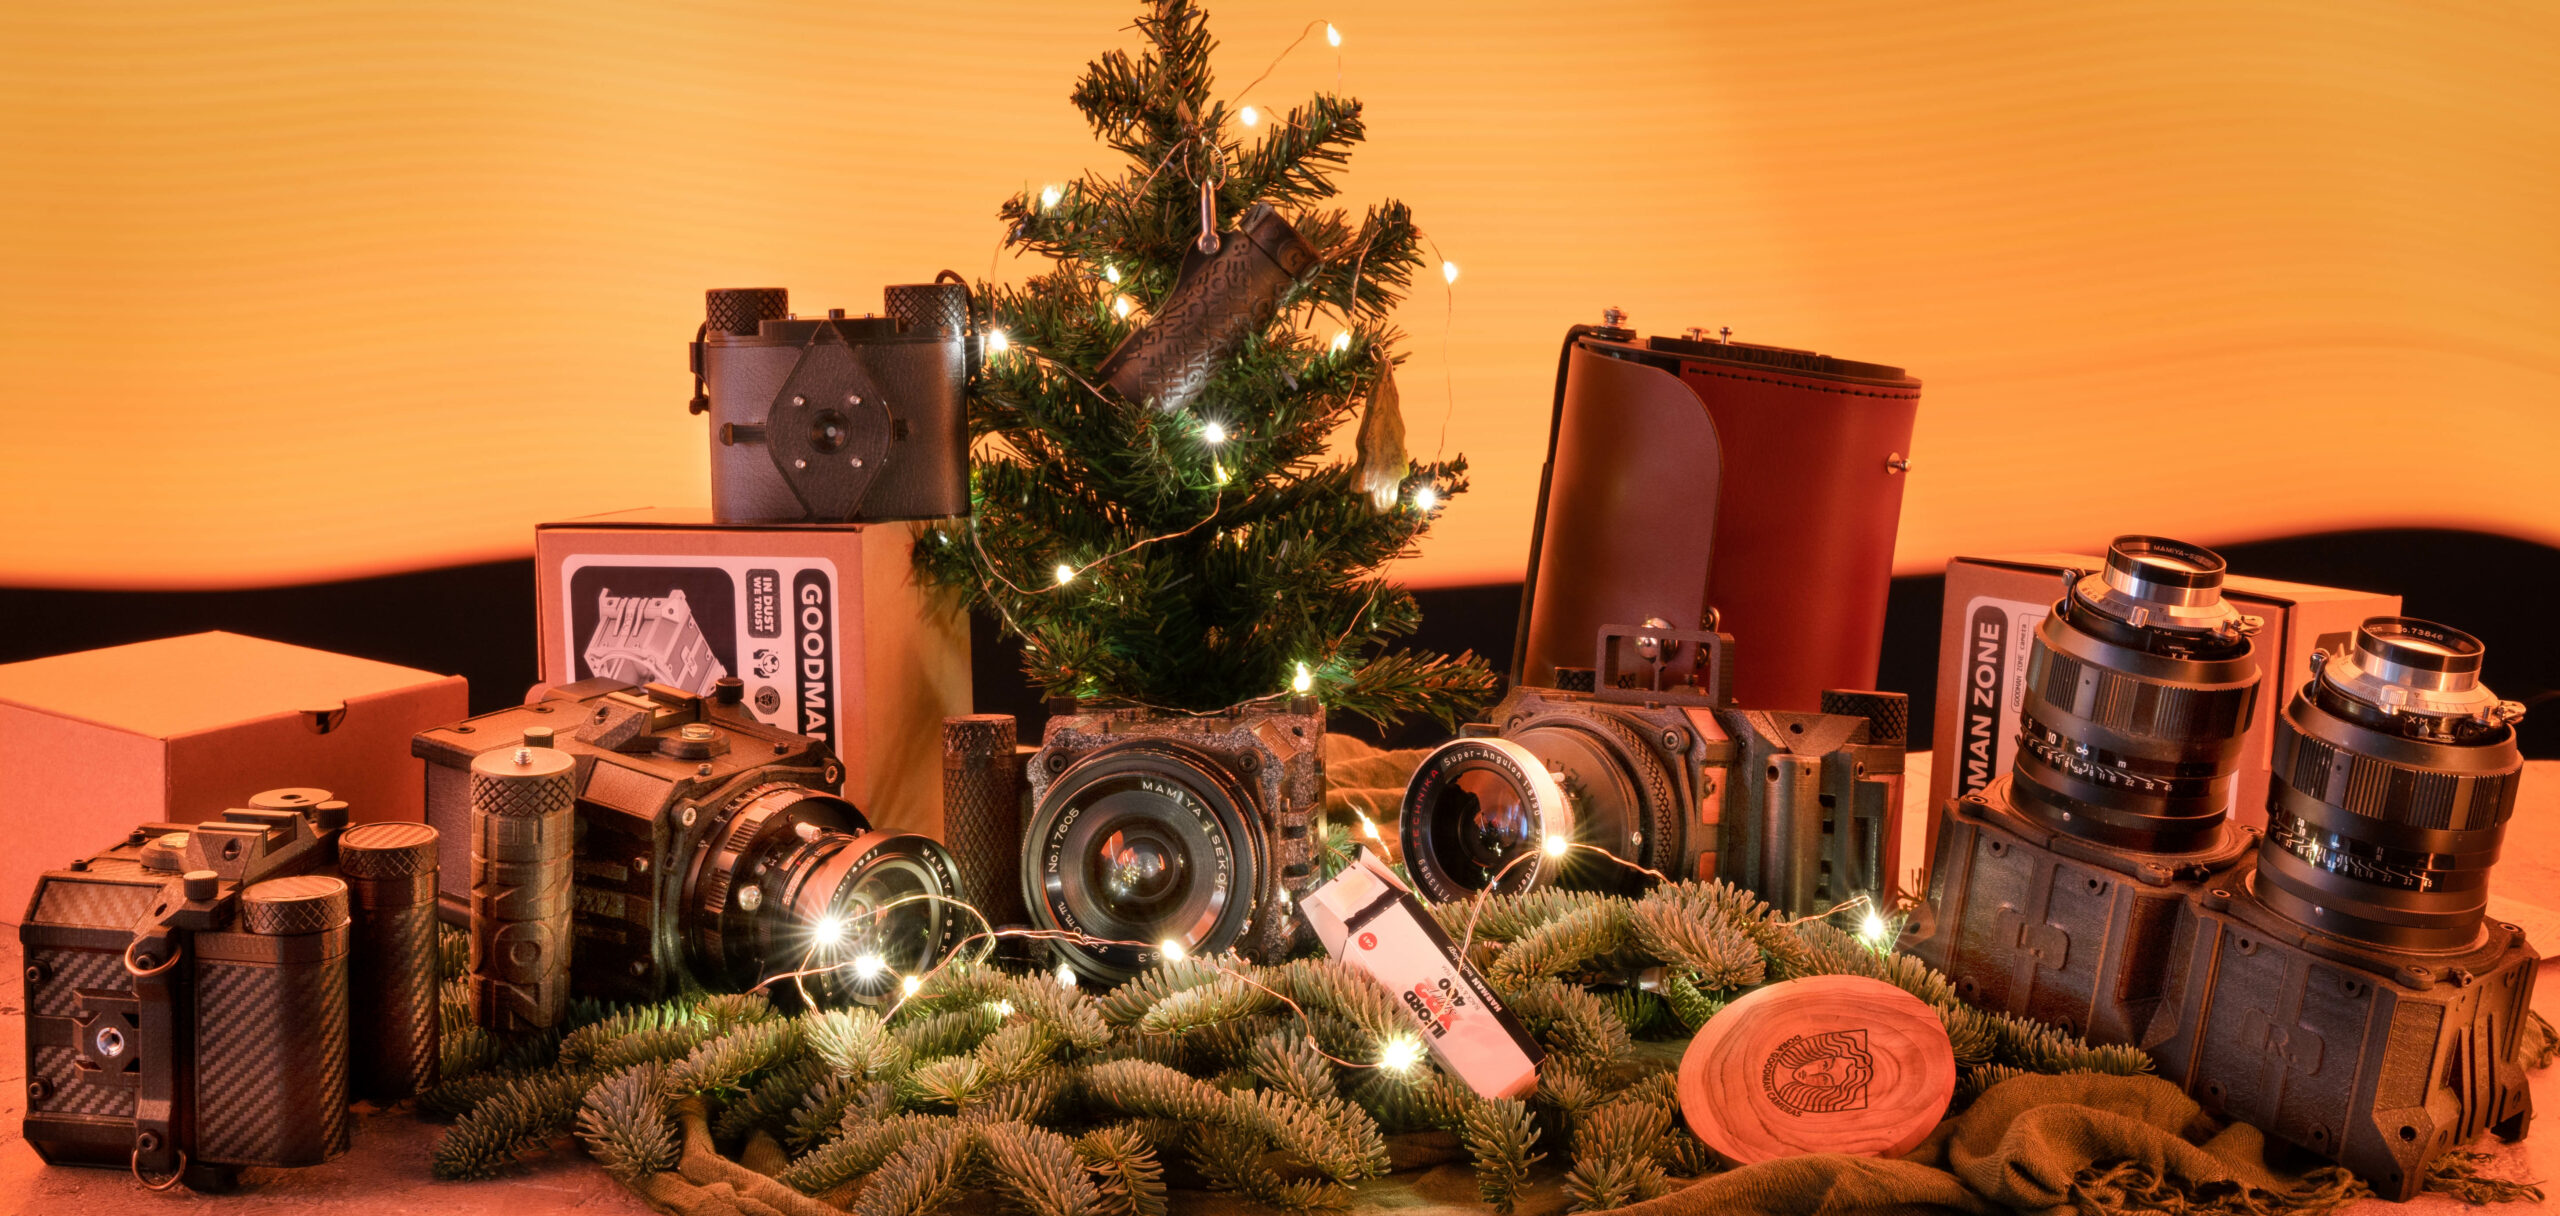 The Dora Goodman Holiday Gift-Giving Guide:  9 Gift Ideas for the Film Photographer in Your Life